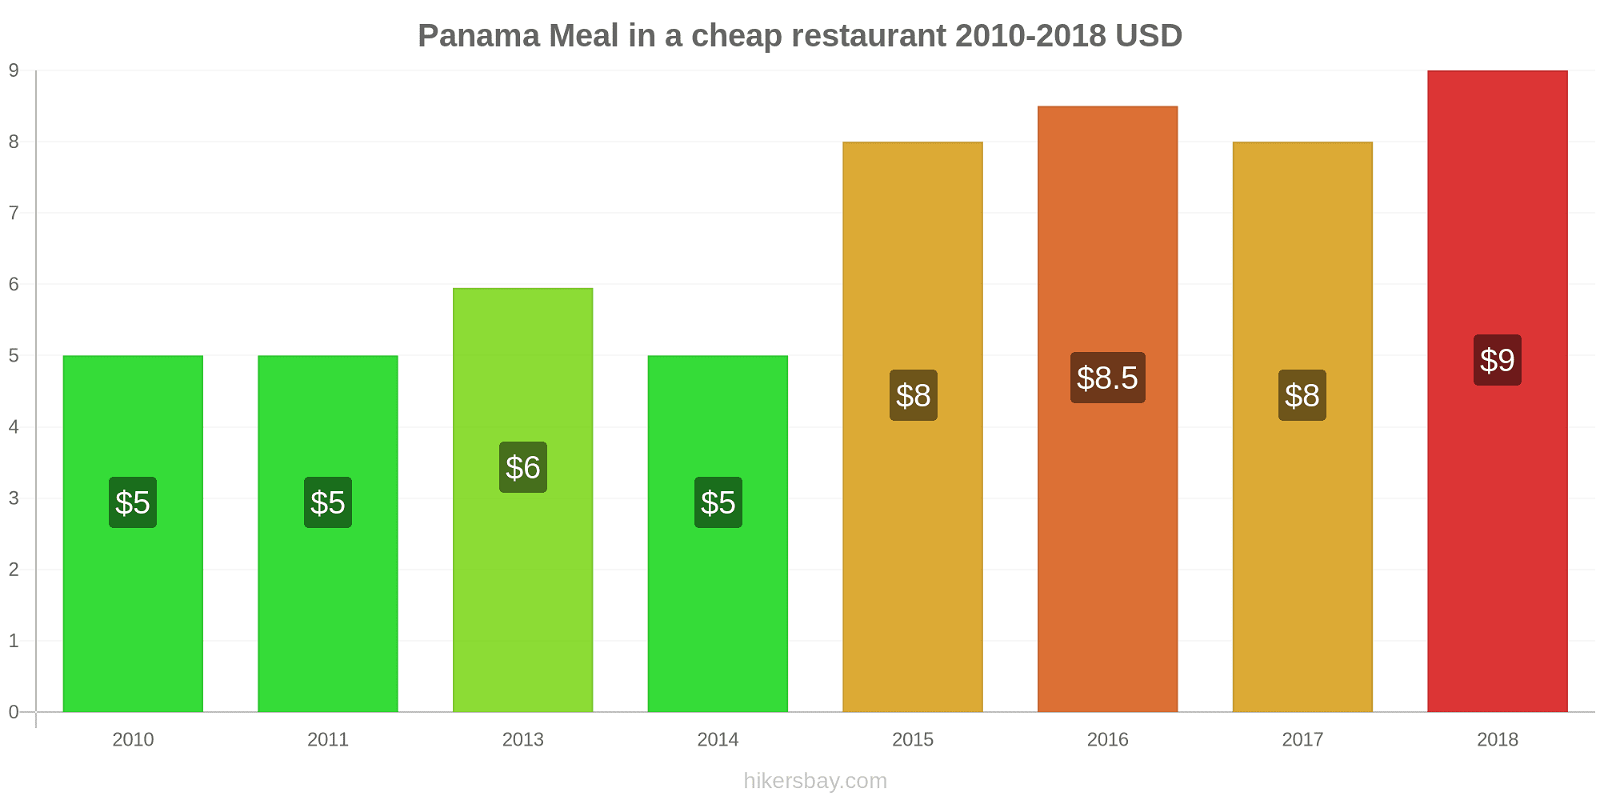 Panama price changes Meal in a cheap restaurant hikersbay.com